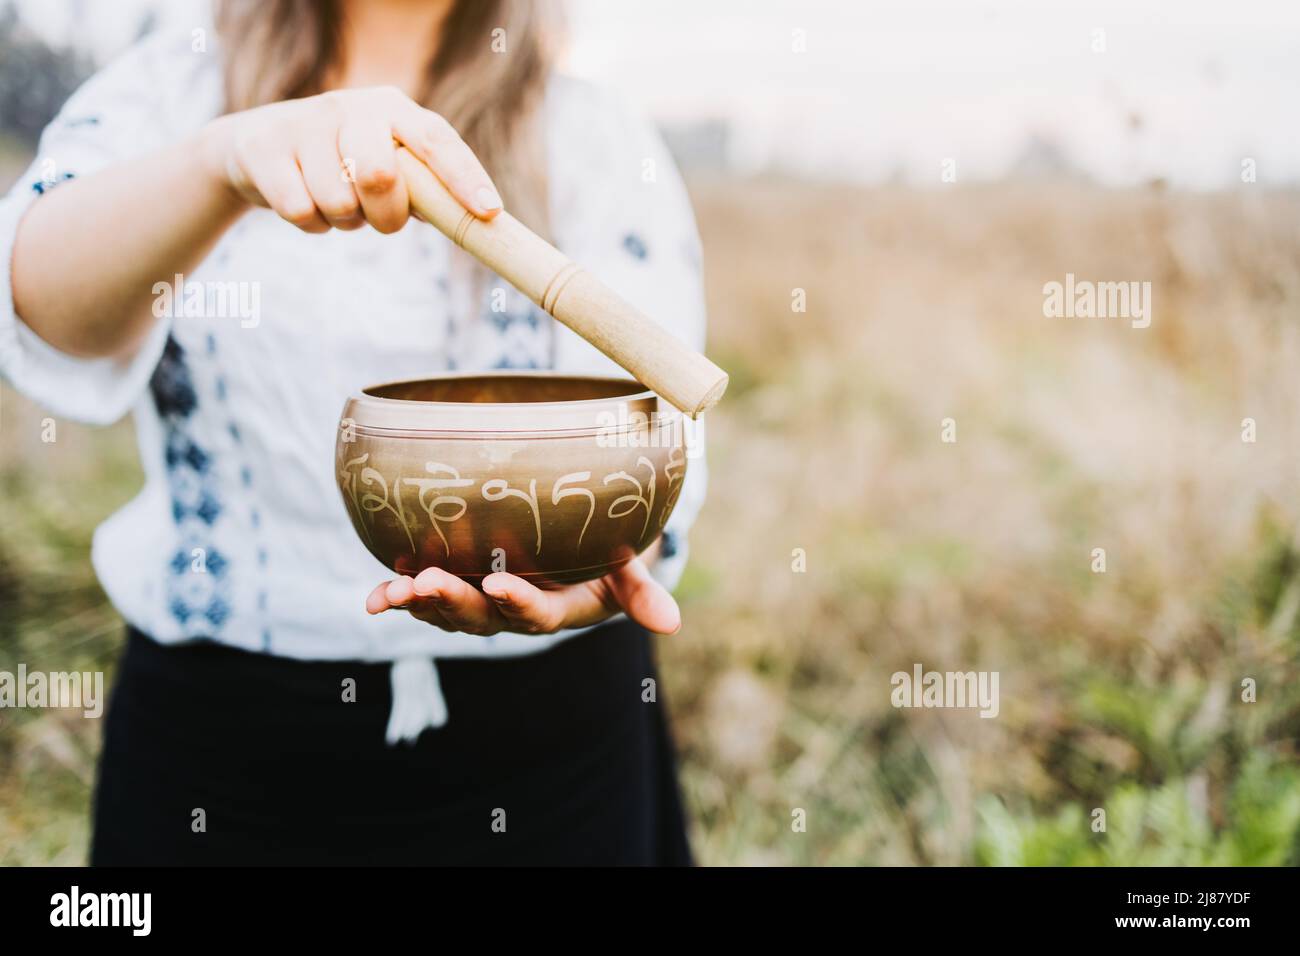 White and black dressed buddhist woman playing a tibetan singing bowl with a wooden stock. Selective focus. Stock Photo